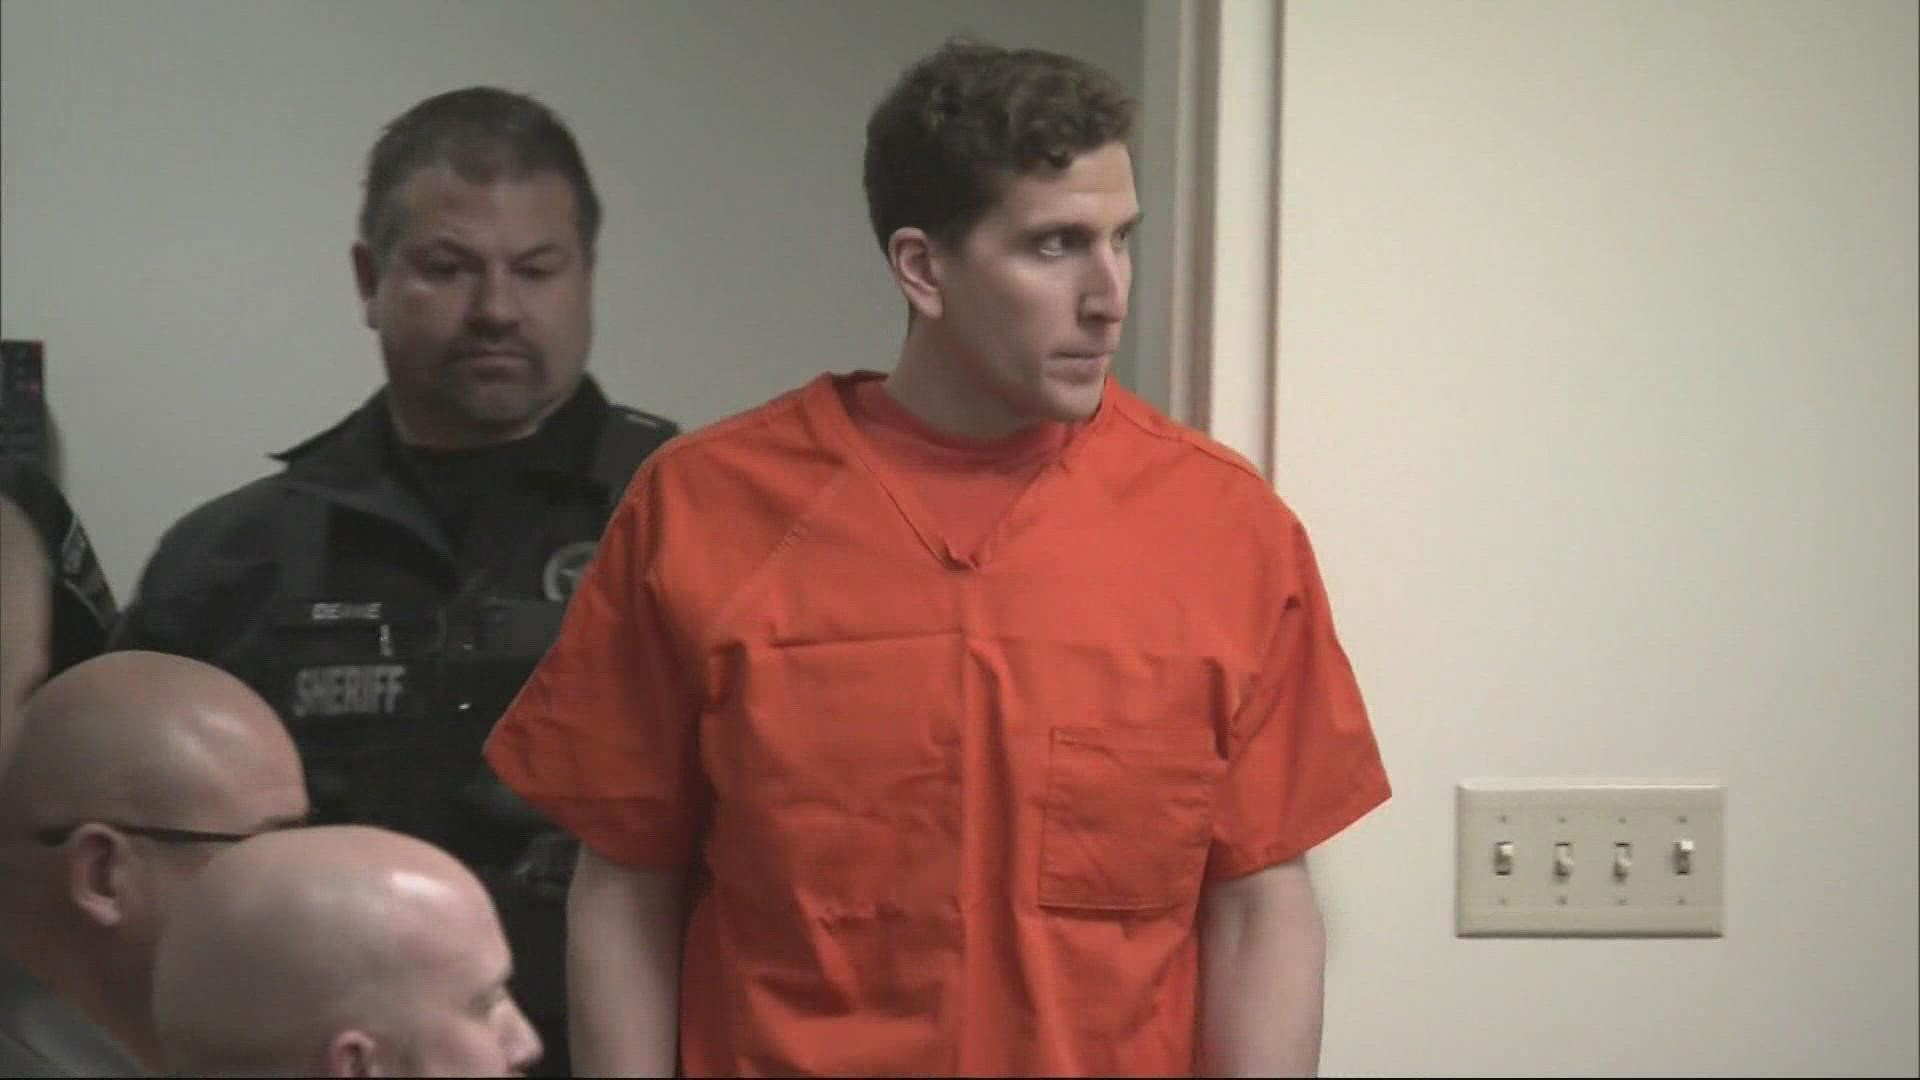 Court documents reveal how investigators used DNA to zero in on Brian Kohberger, the man accused of killing four University of Idaho students.